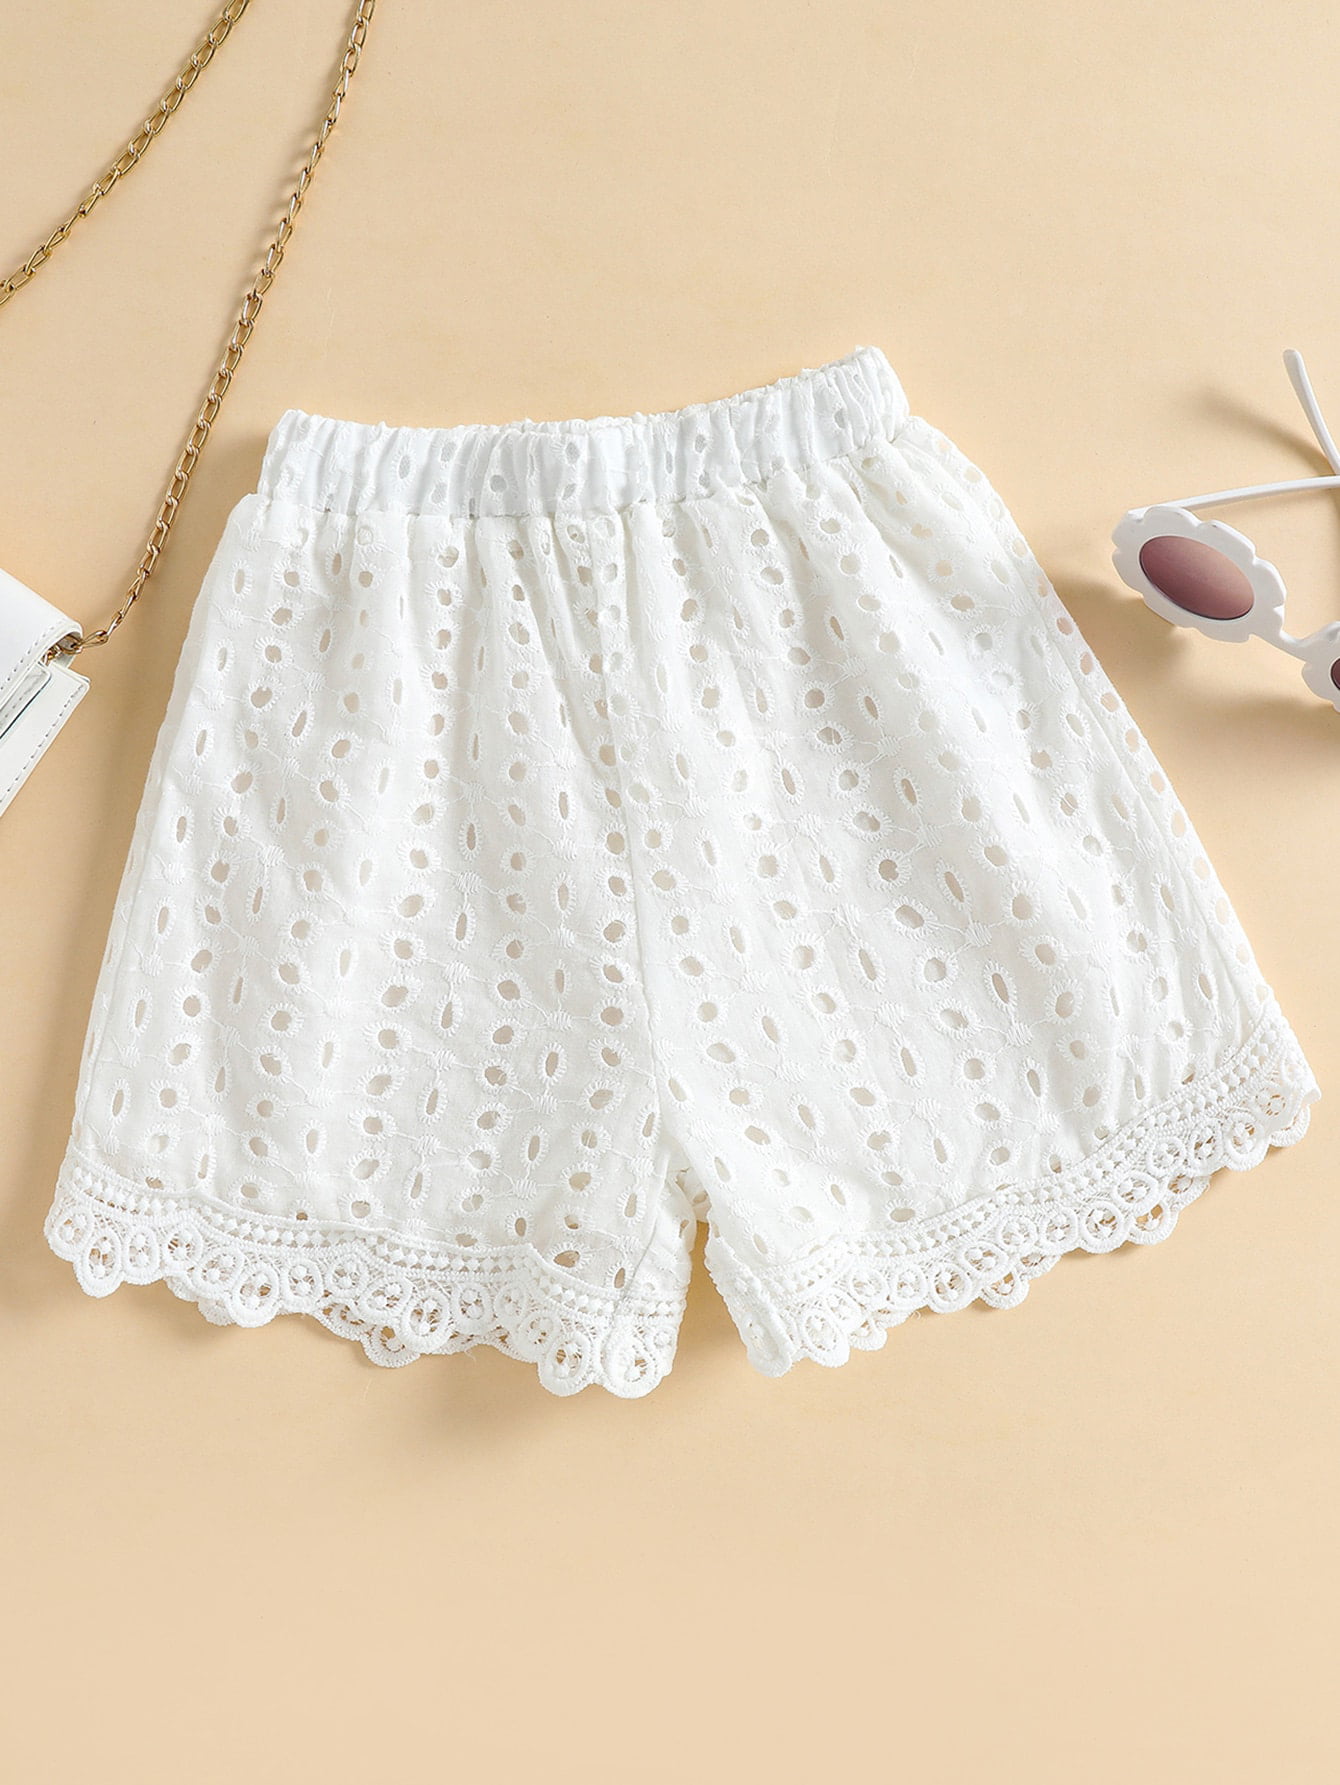 Girl's Toddler Shorts with Drawstring and Eyelet Lace Trim *New with Tags 3T 